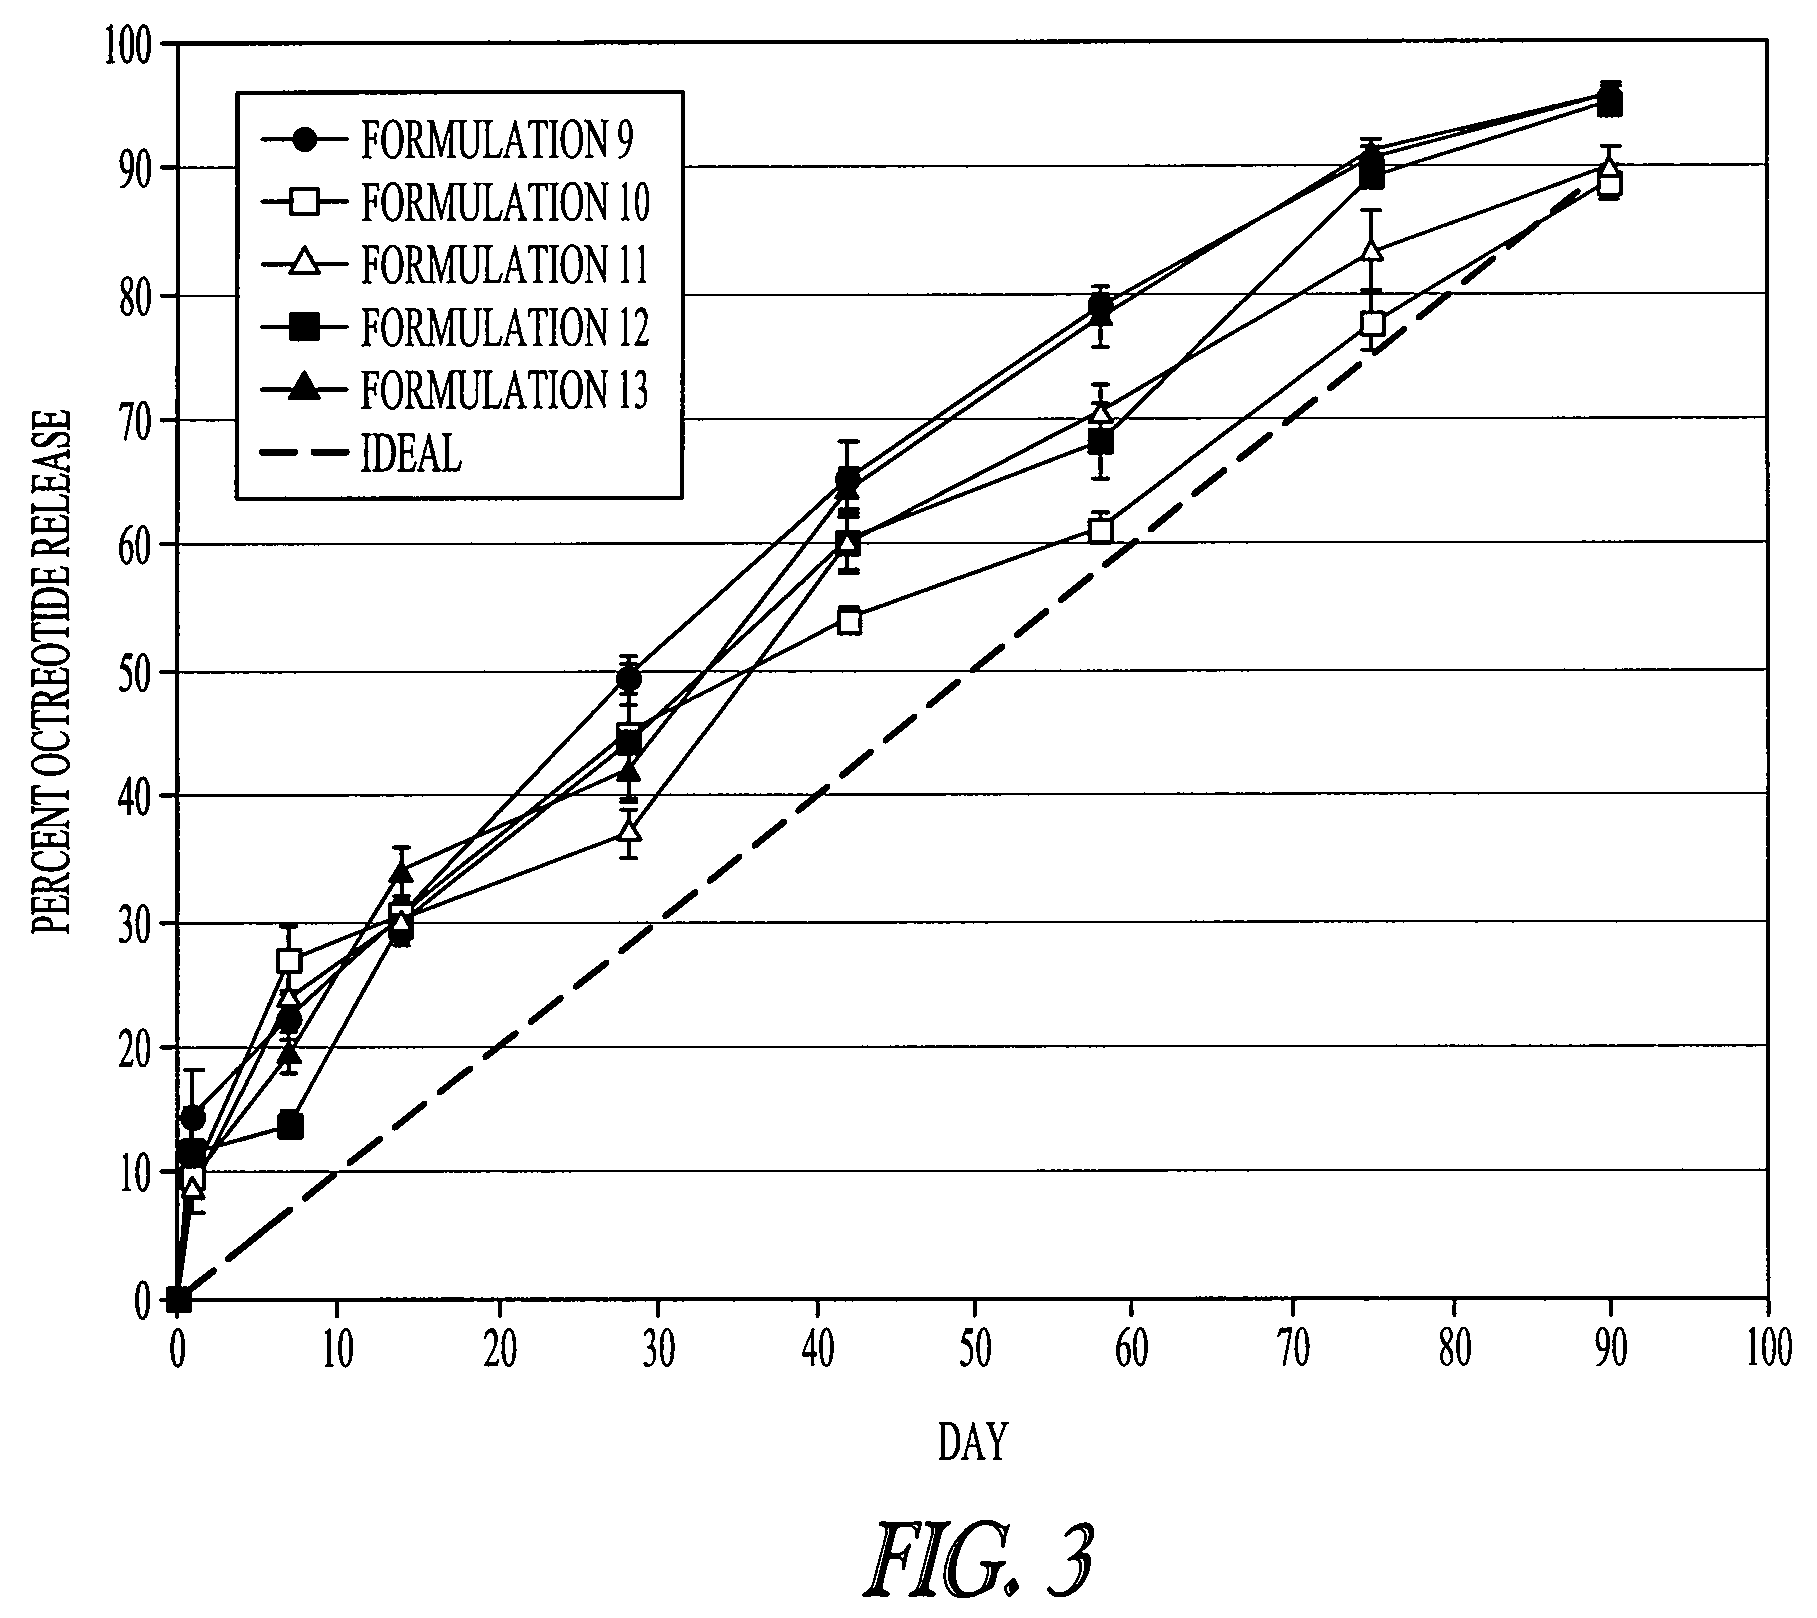 Controlled release copolymer formulation with improved release kinetics